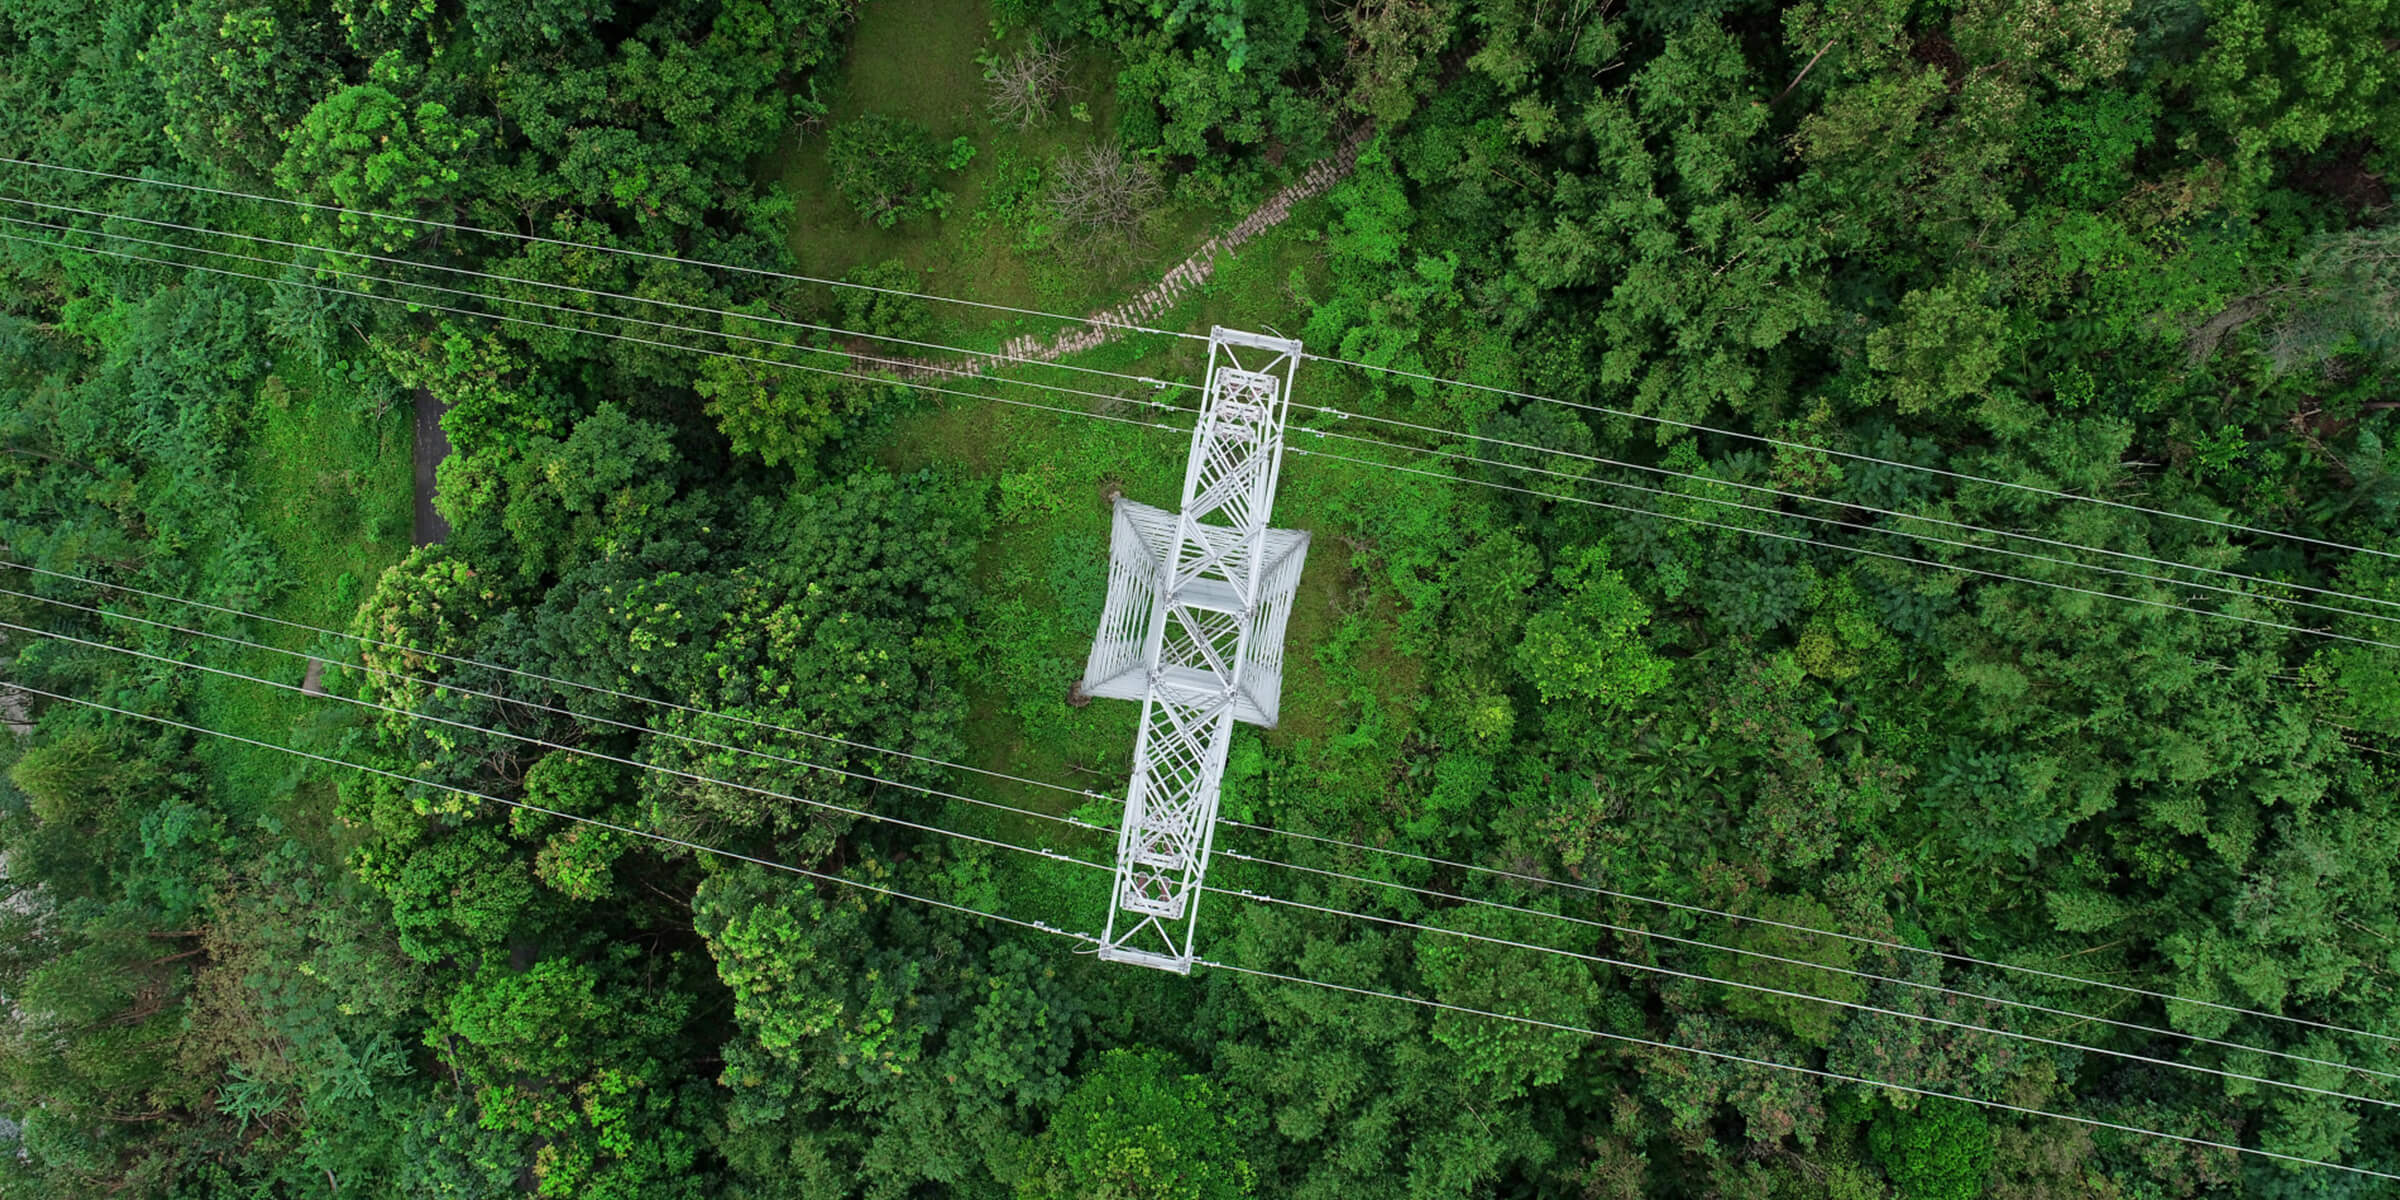 Pylon surrounded by vegetation, photographed from directly above